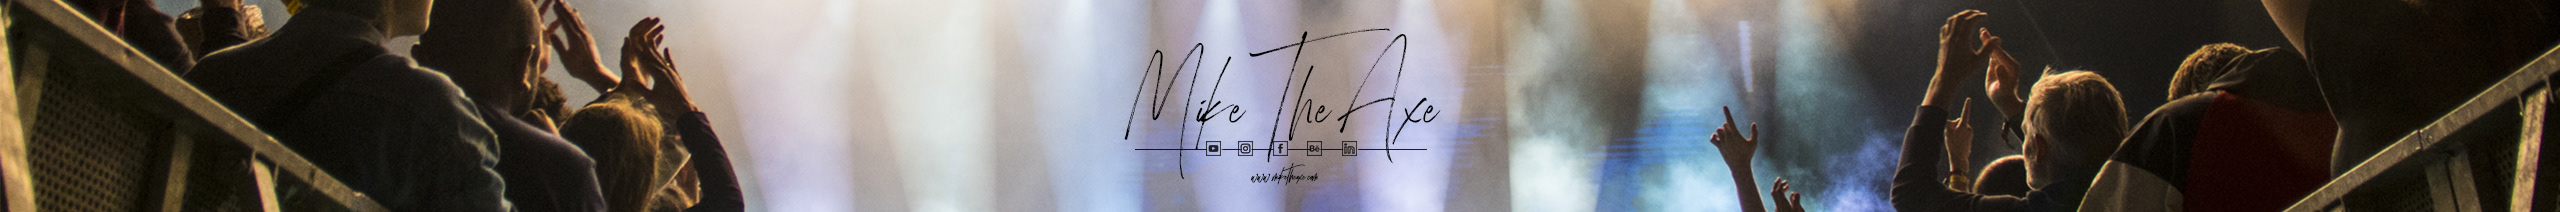 Mike The Axe のプロファイルバナー